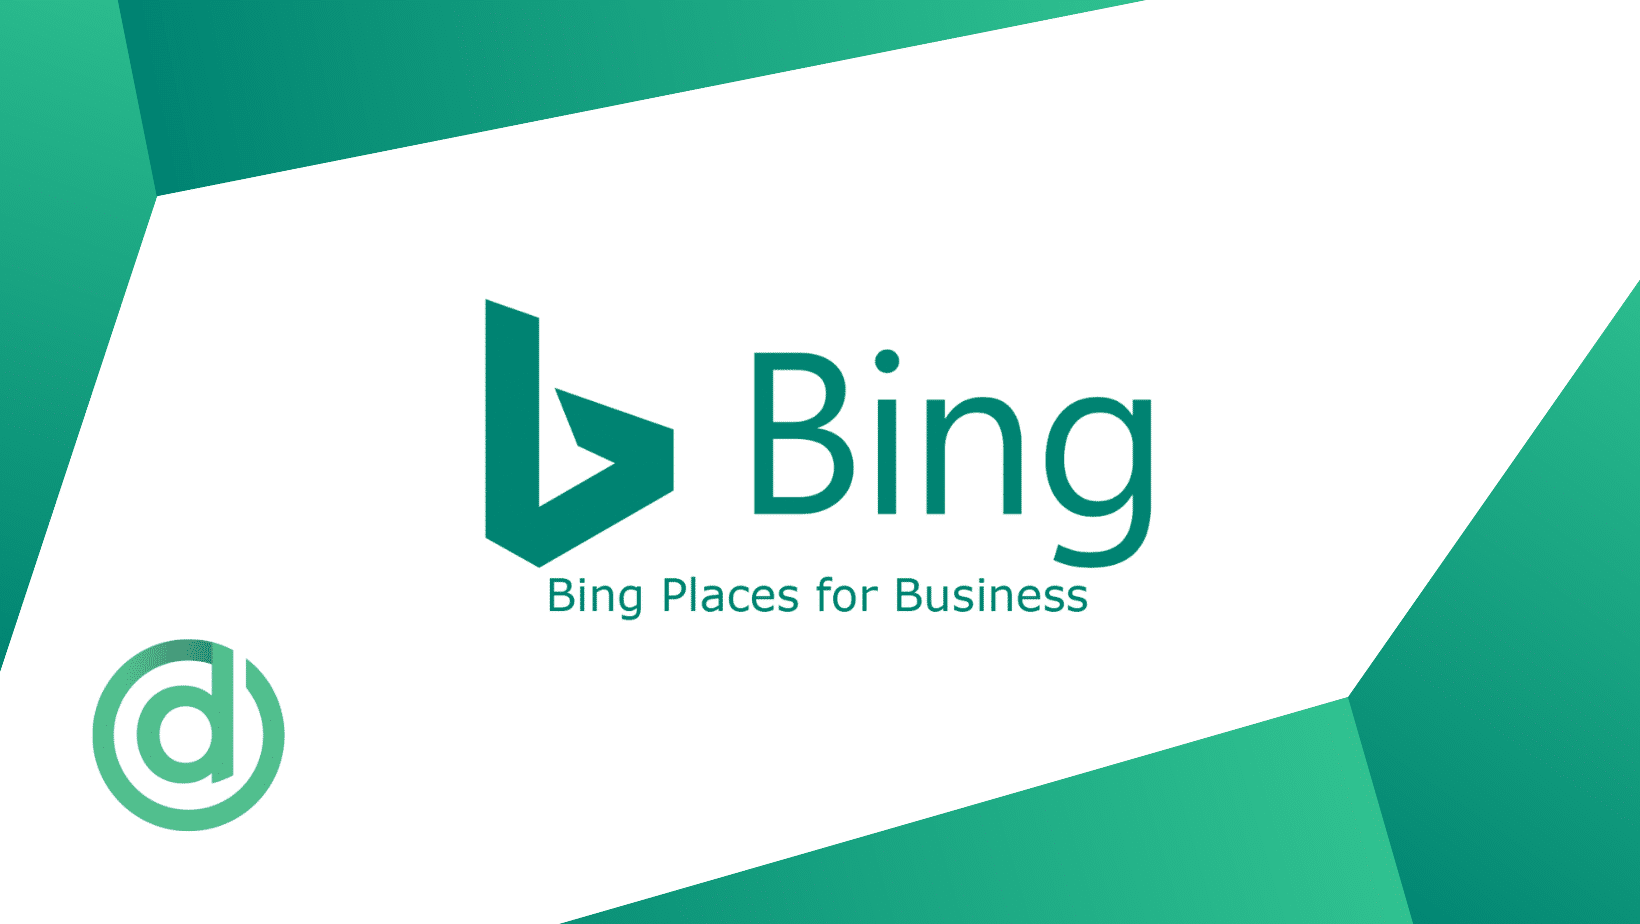 Bing places for business